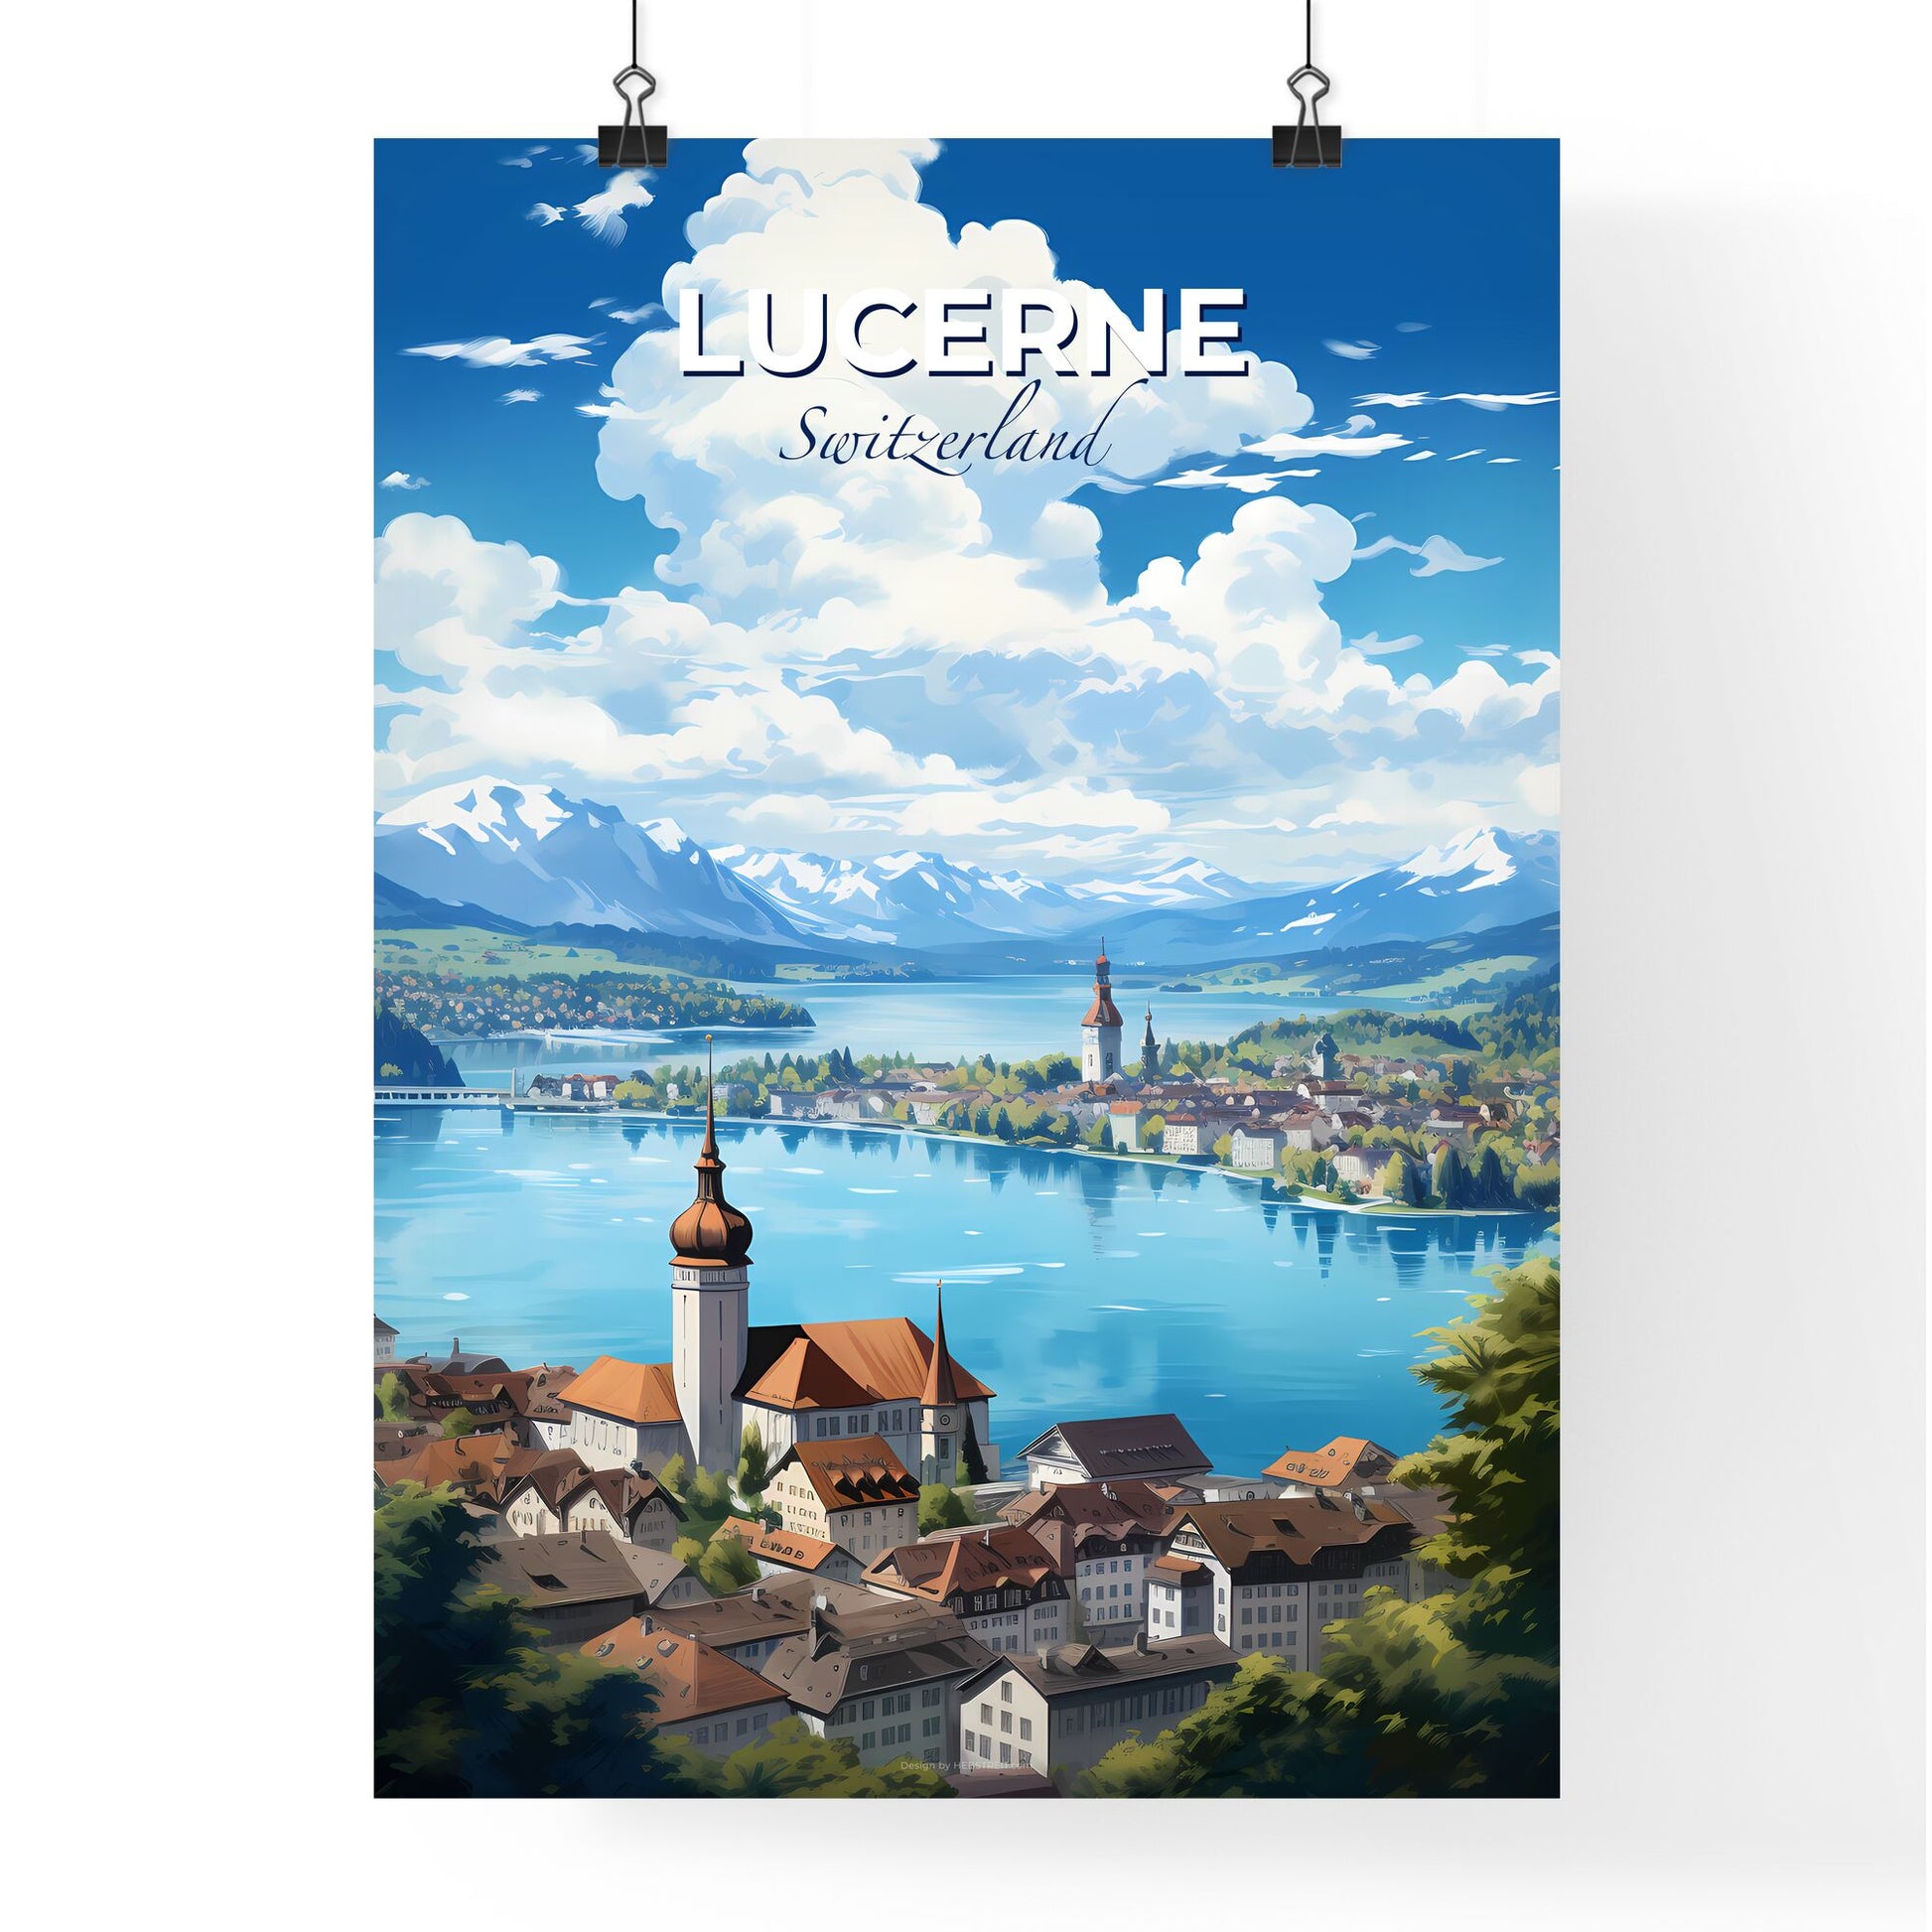 Lucerne Switzerland Skyline - A City By A Lake - Customizable Travel Gift Default Title